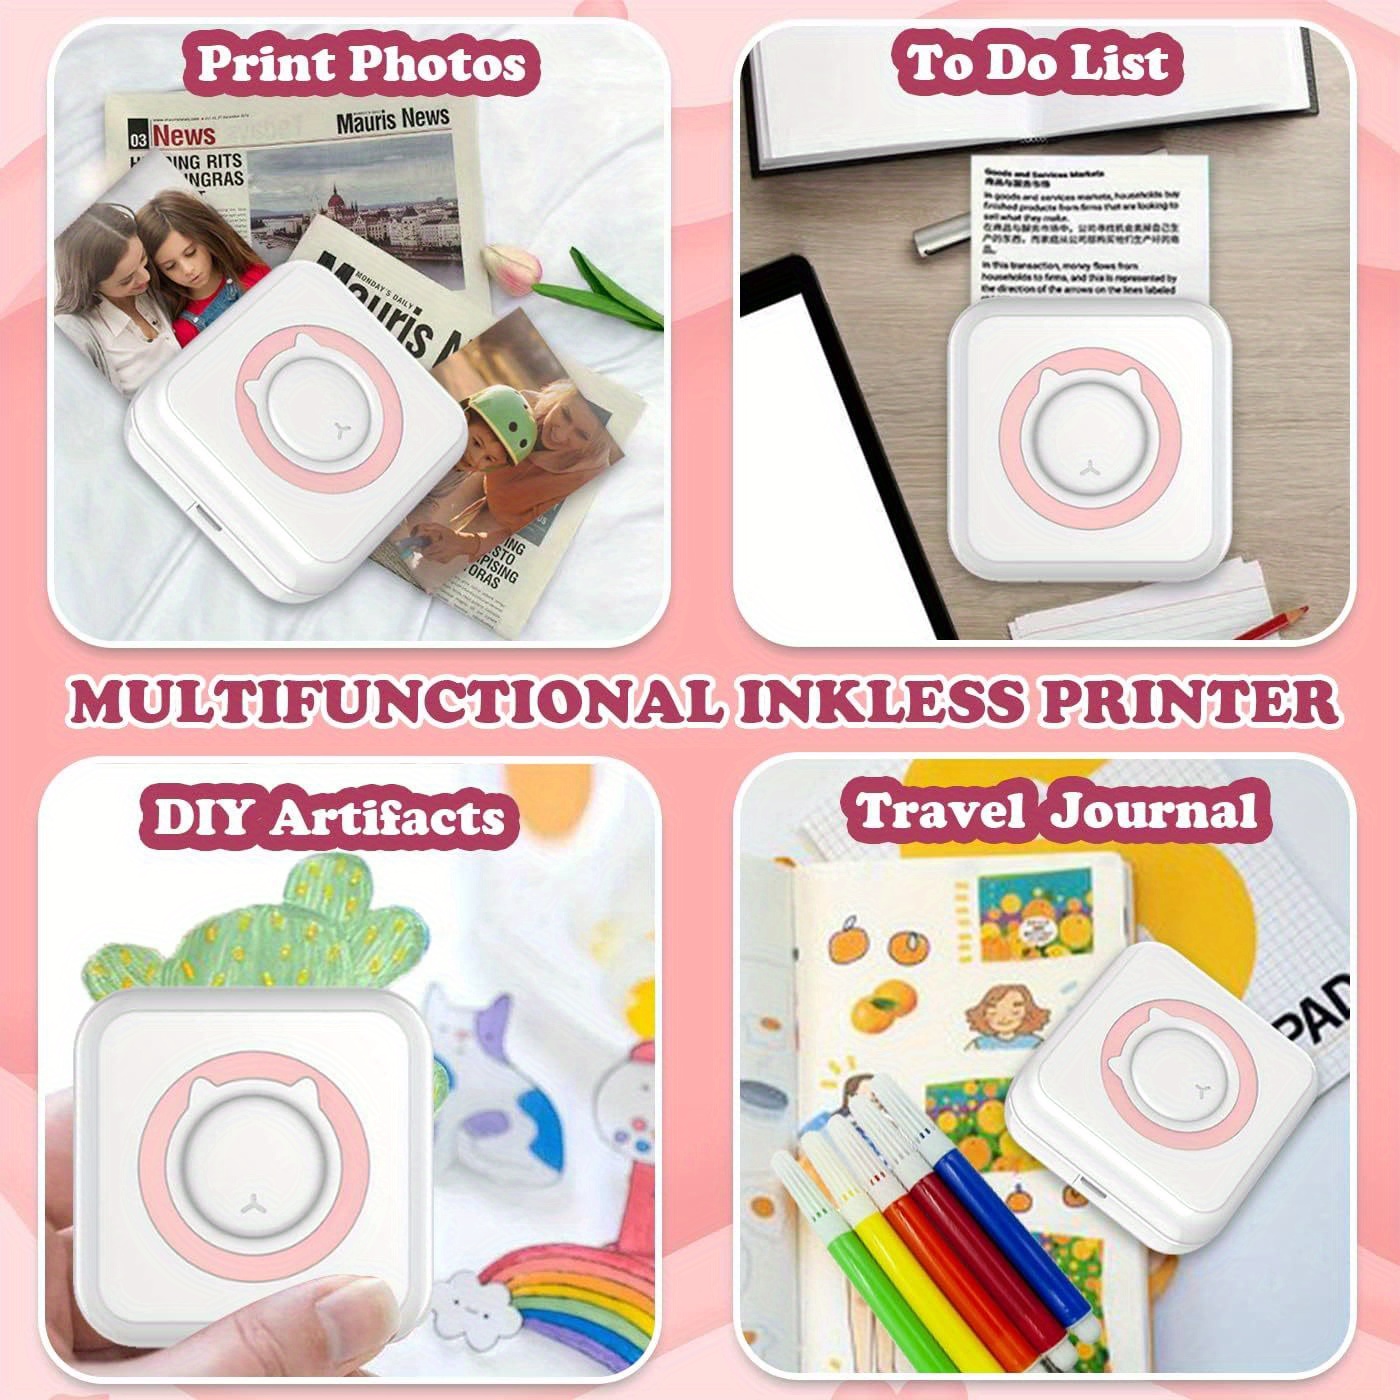 mini pocket printer portable thermal printer for pictures error printer label printer retro style photos receipts notes lists label memo qr codes for android or ios app mobile phone printing details 4